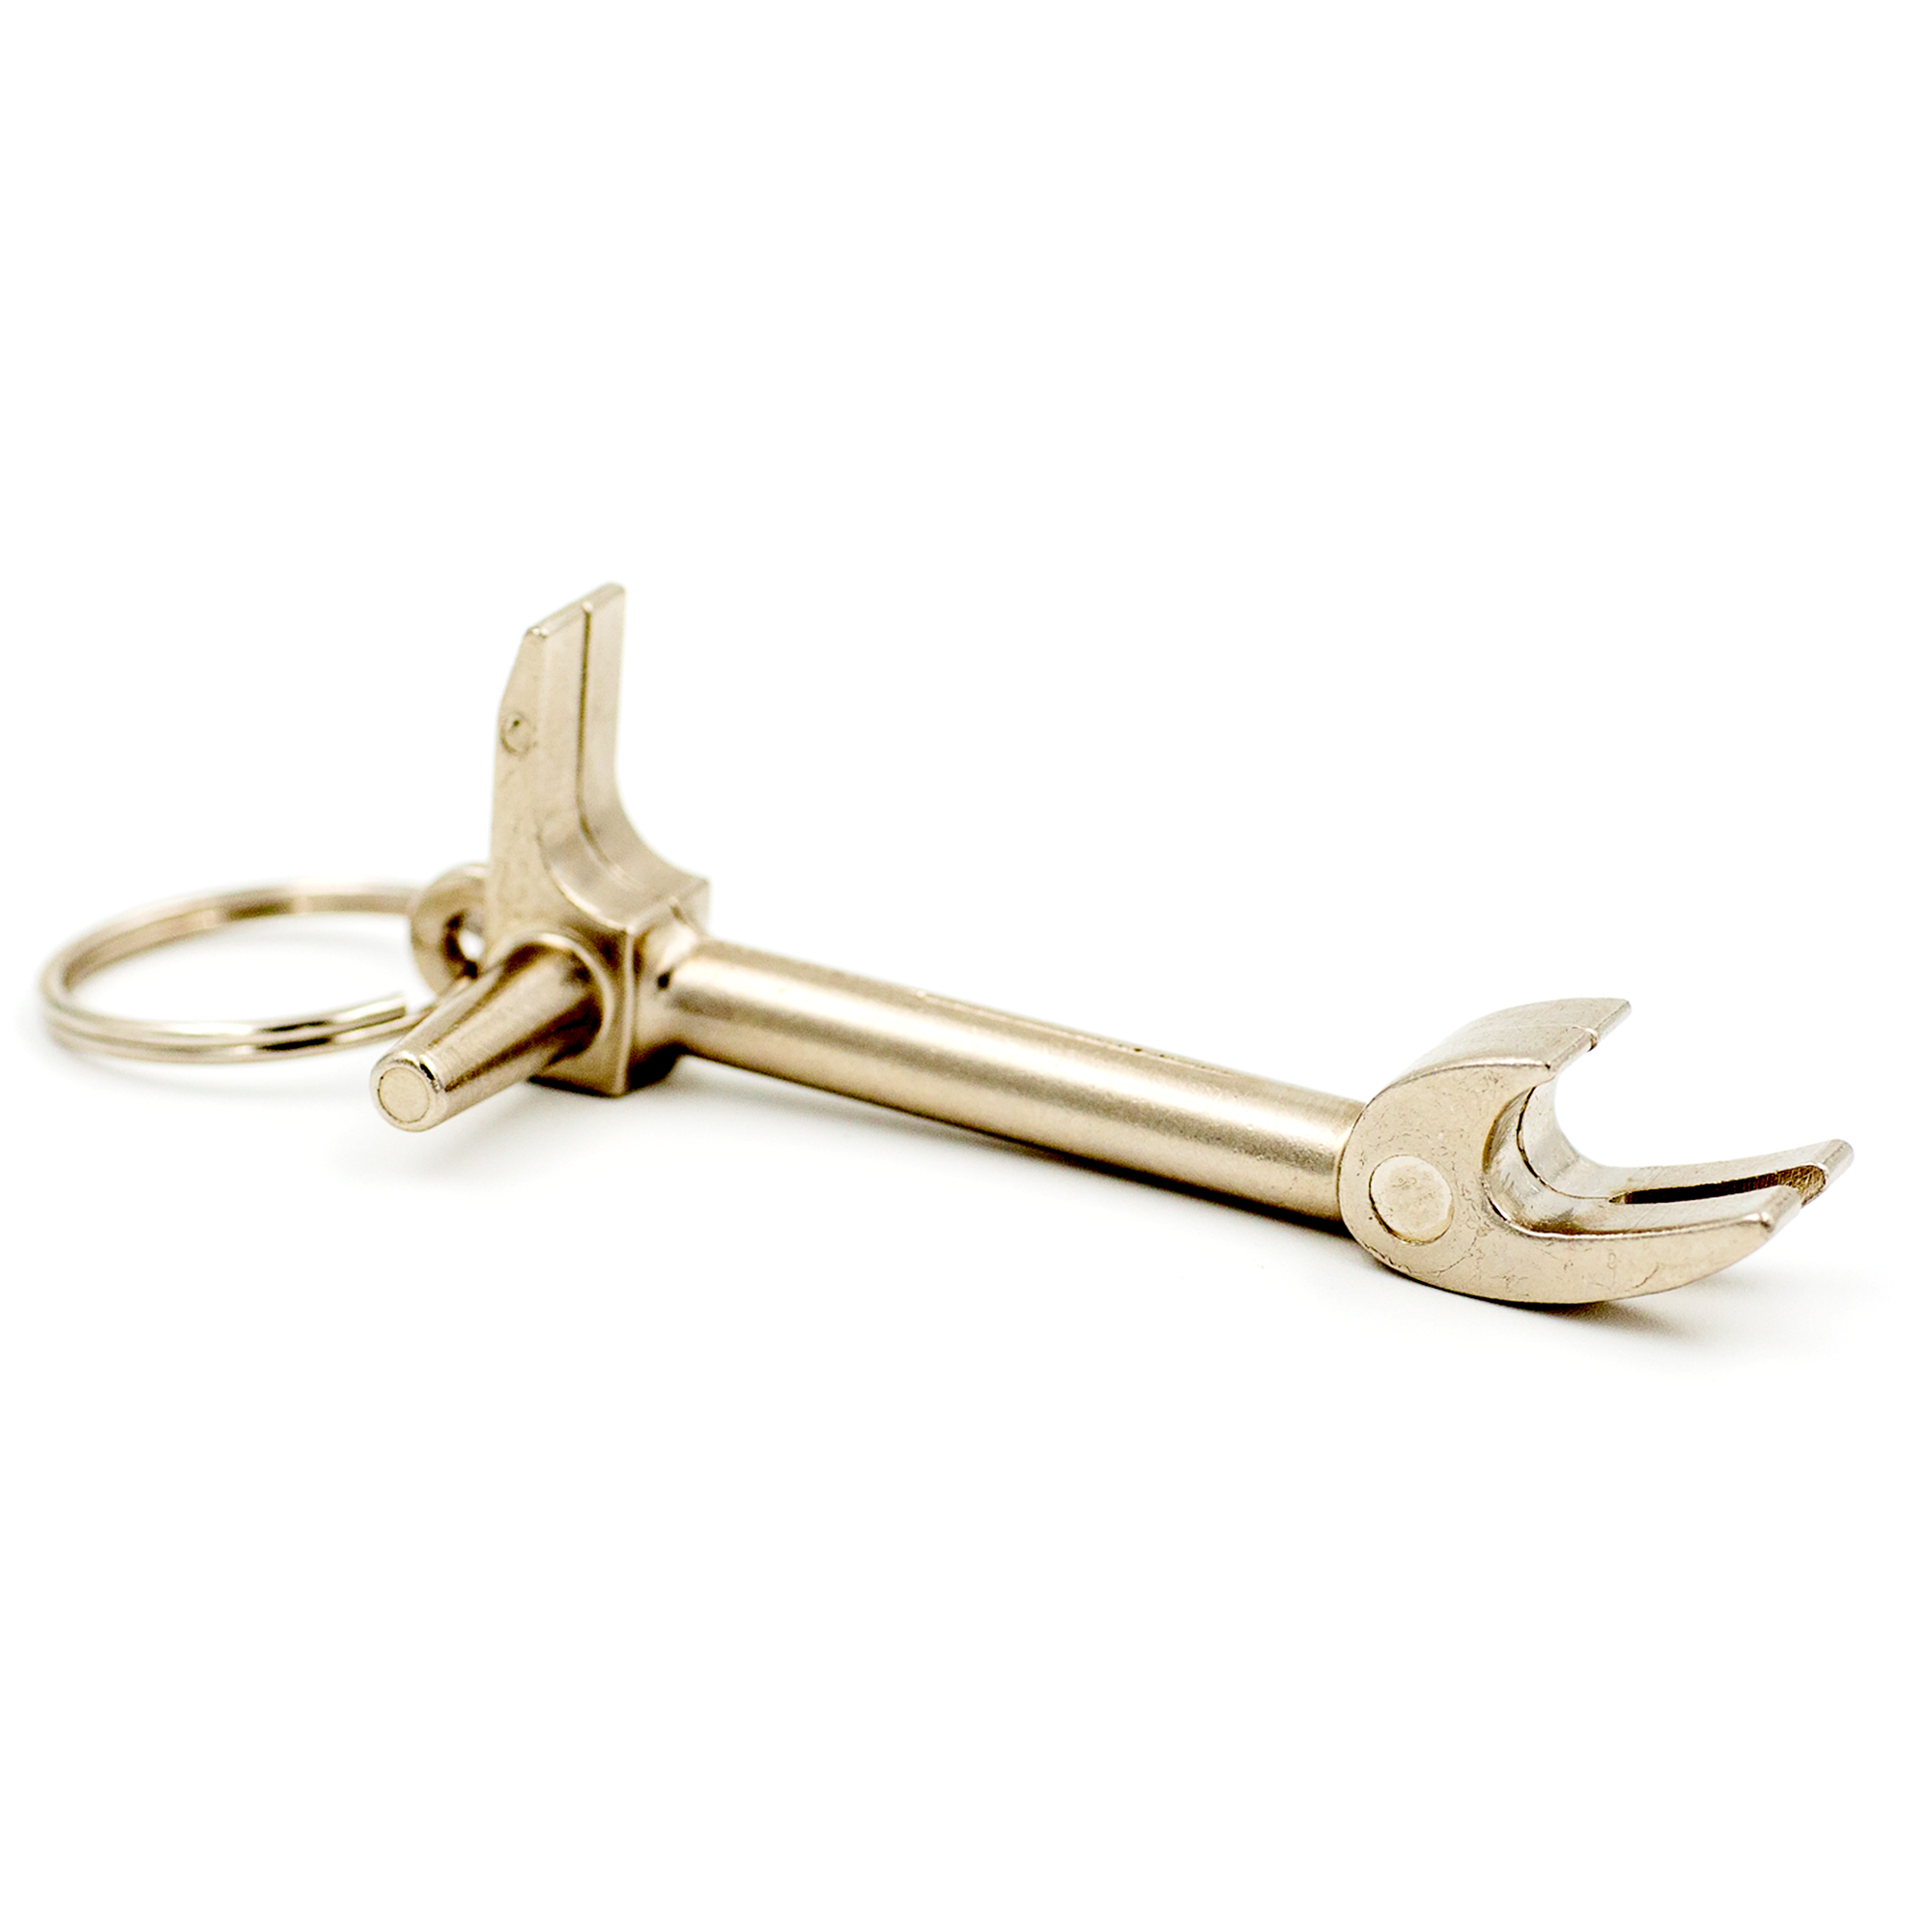 A halligan bar bottle opener fit for your keychain.